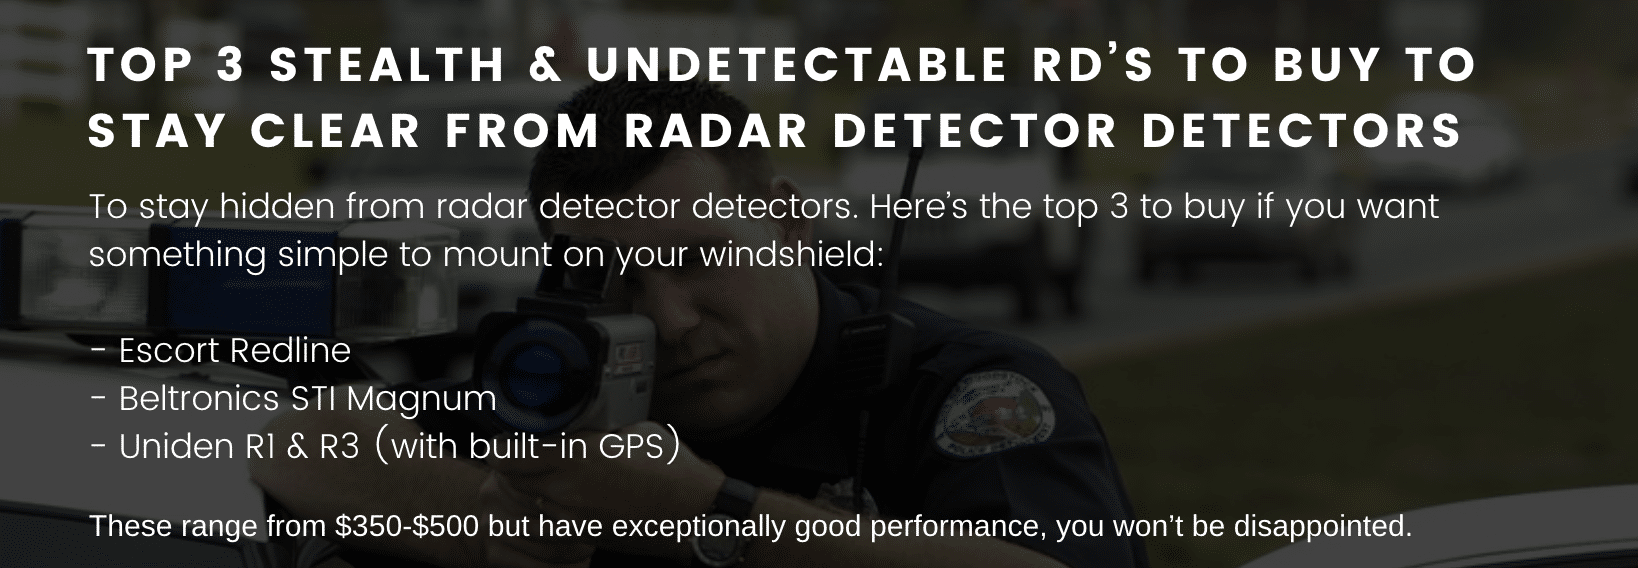 Top 3 Stealth & Undetectable RD’s to Buy To Stay Clear from Radar Detector Detectors